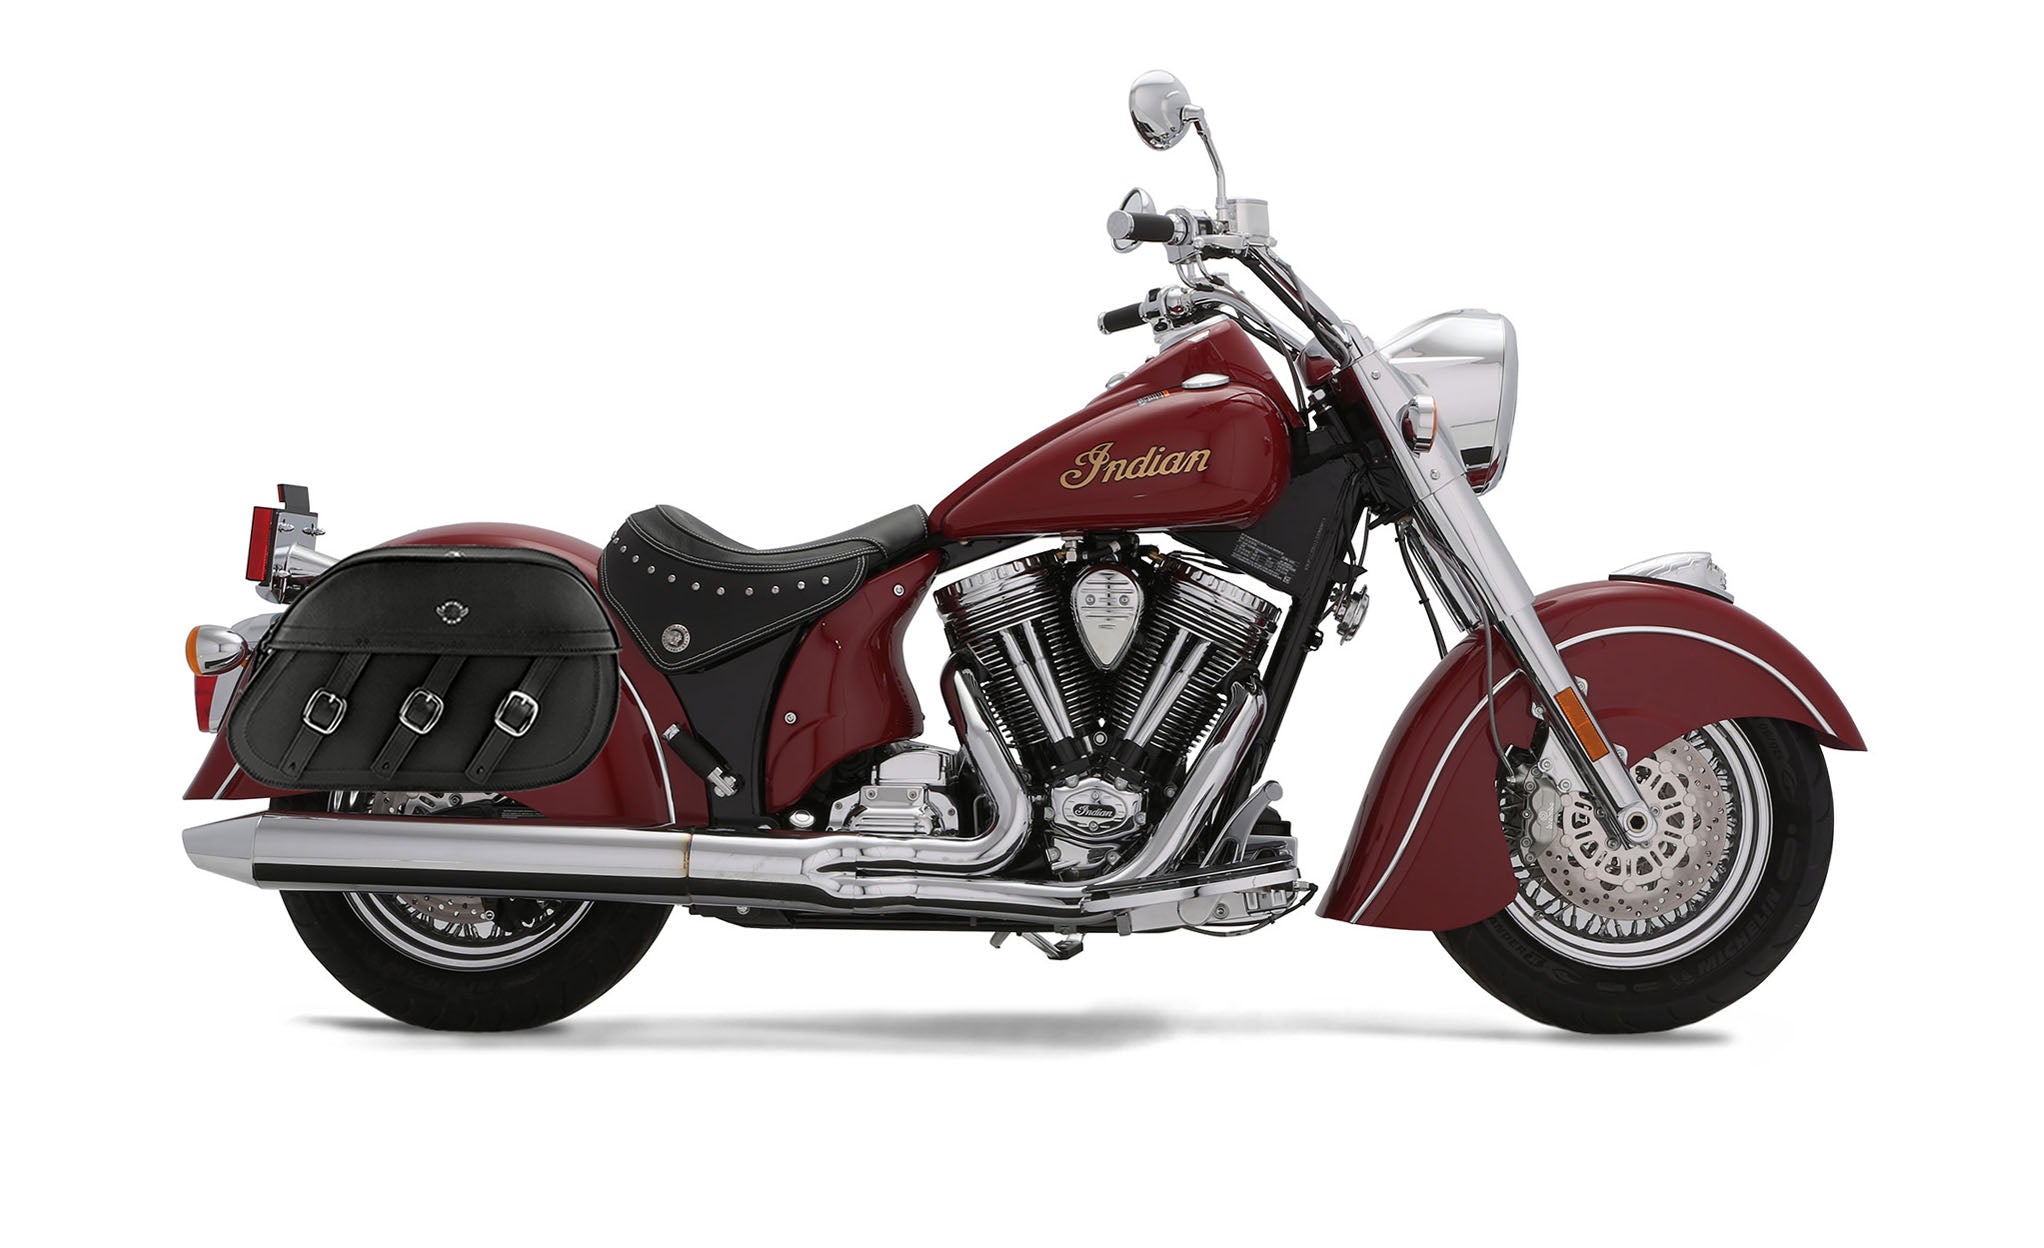 Viking Trianon Extra Large Indian Chief Deluxe Leather Motorcycle Saddlebags on Bike Photo @expand